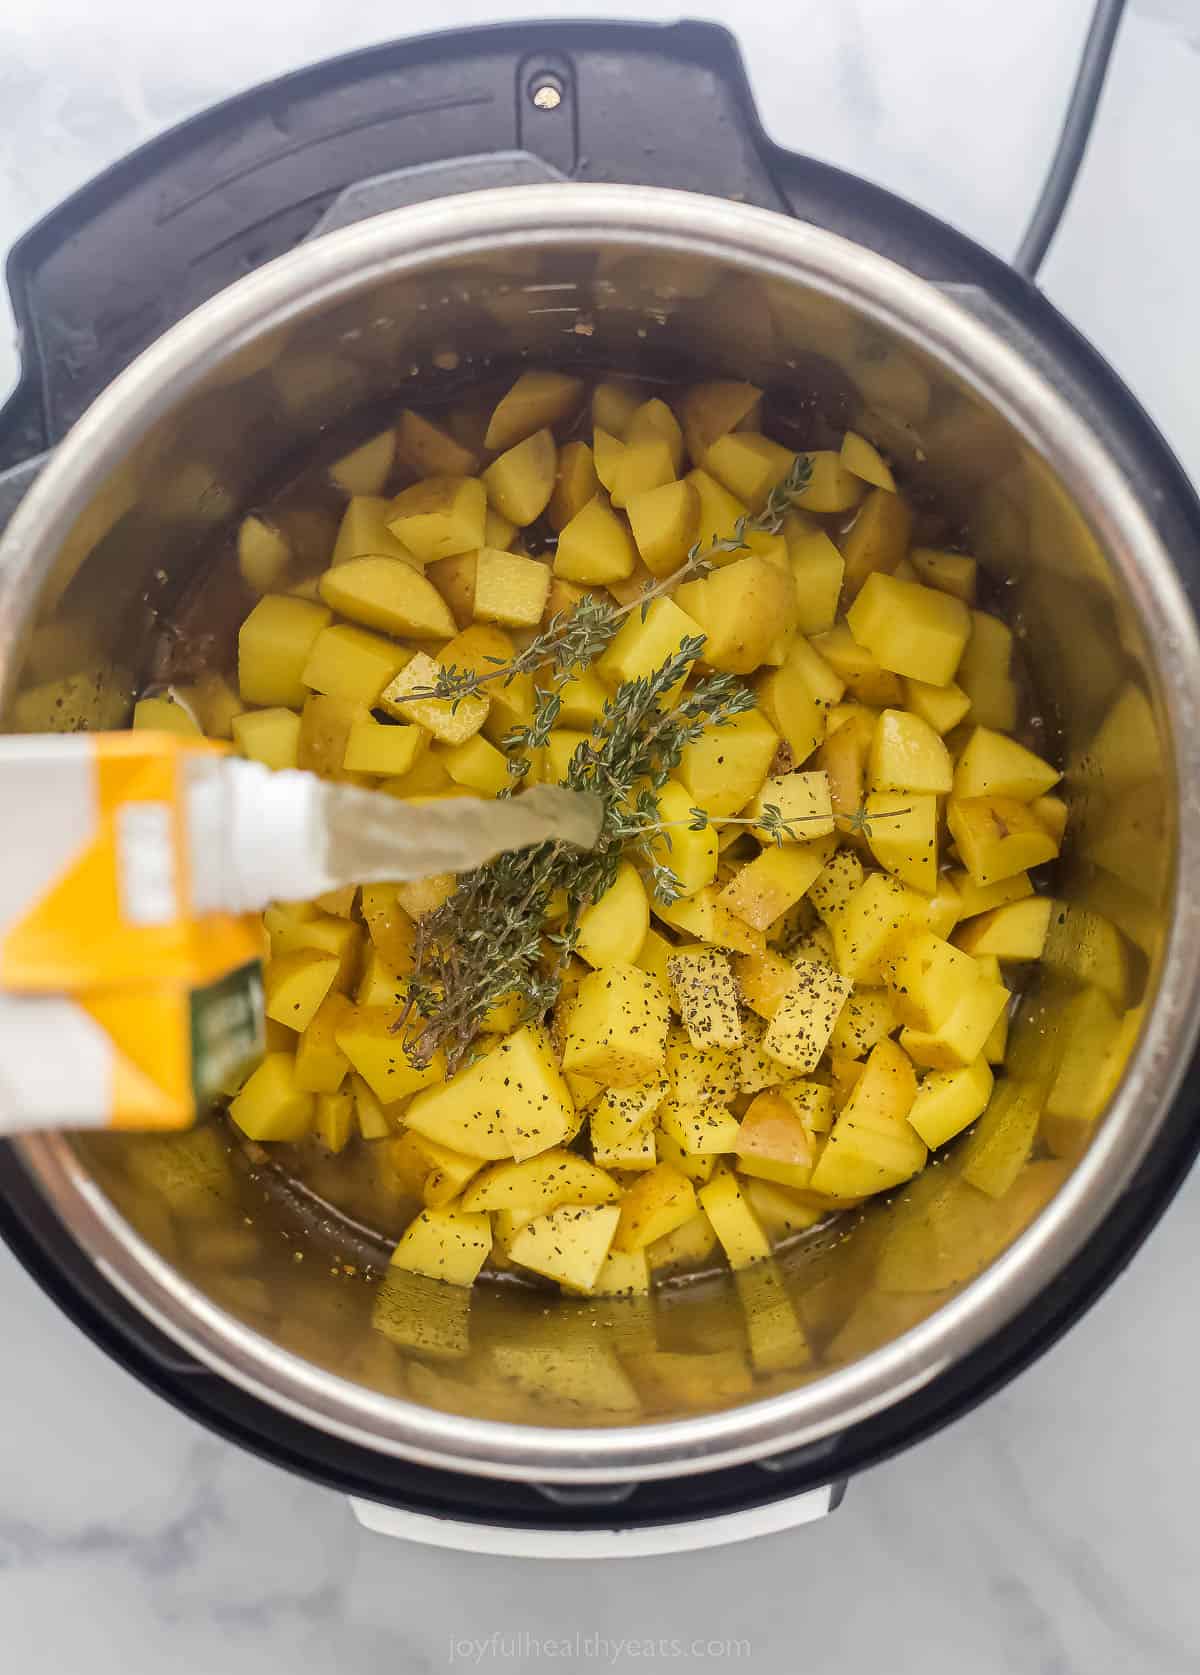 pouring stock into an Instant Pot that has ،atoes and herbs in it